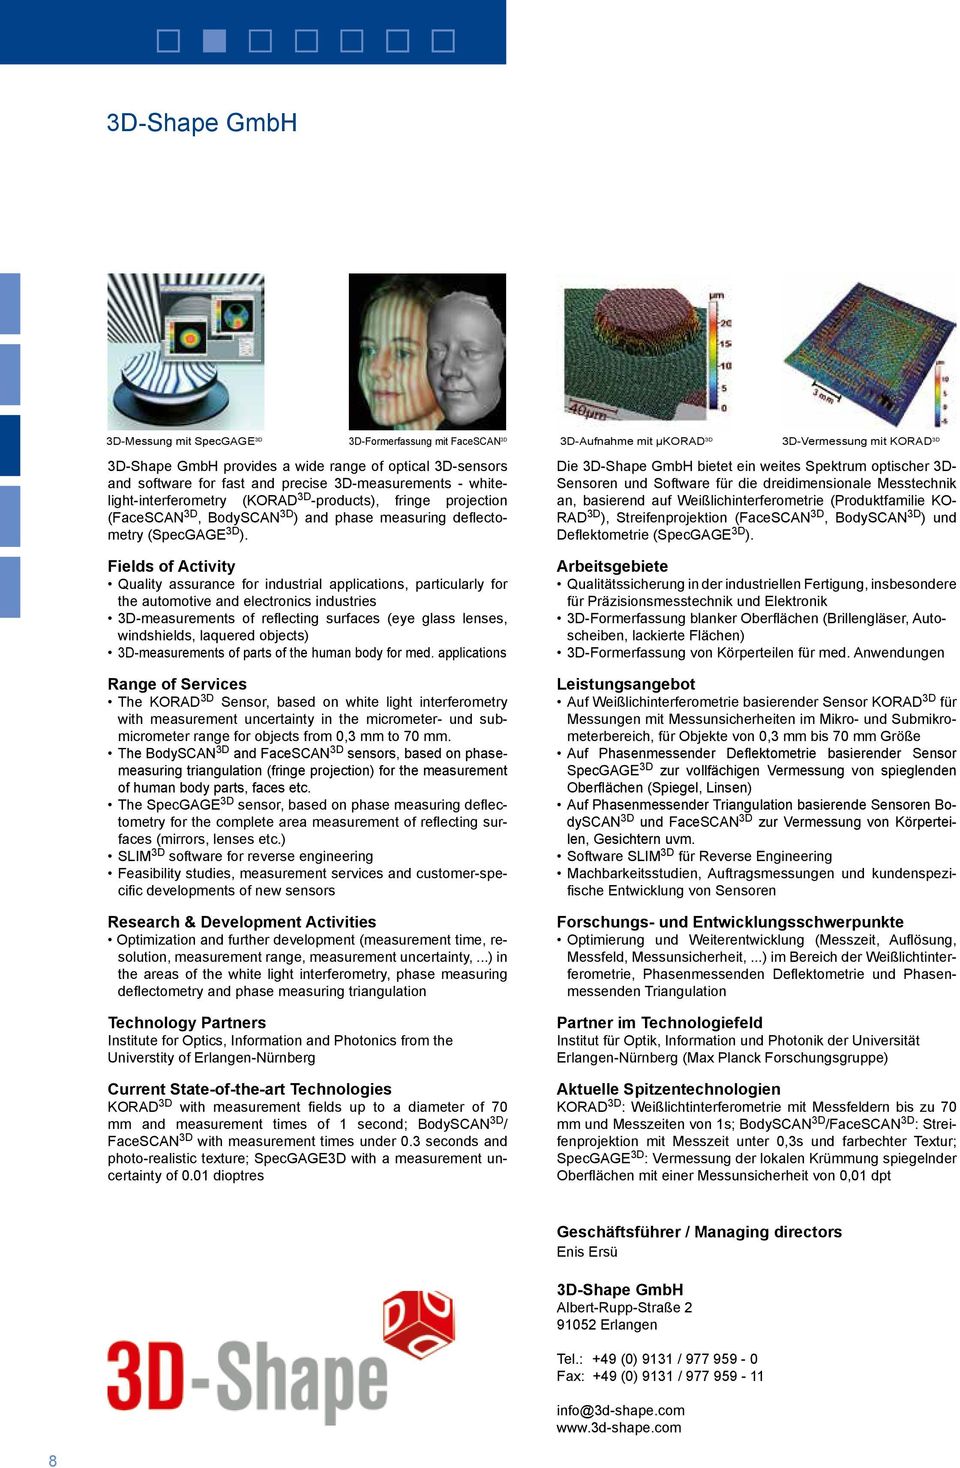 Quality assurance for industrial applications, particularly for the automotive and electronics industries 3D-measurements of reflecting surfaces (eye glass lenses, windshields, laquered objects)